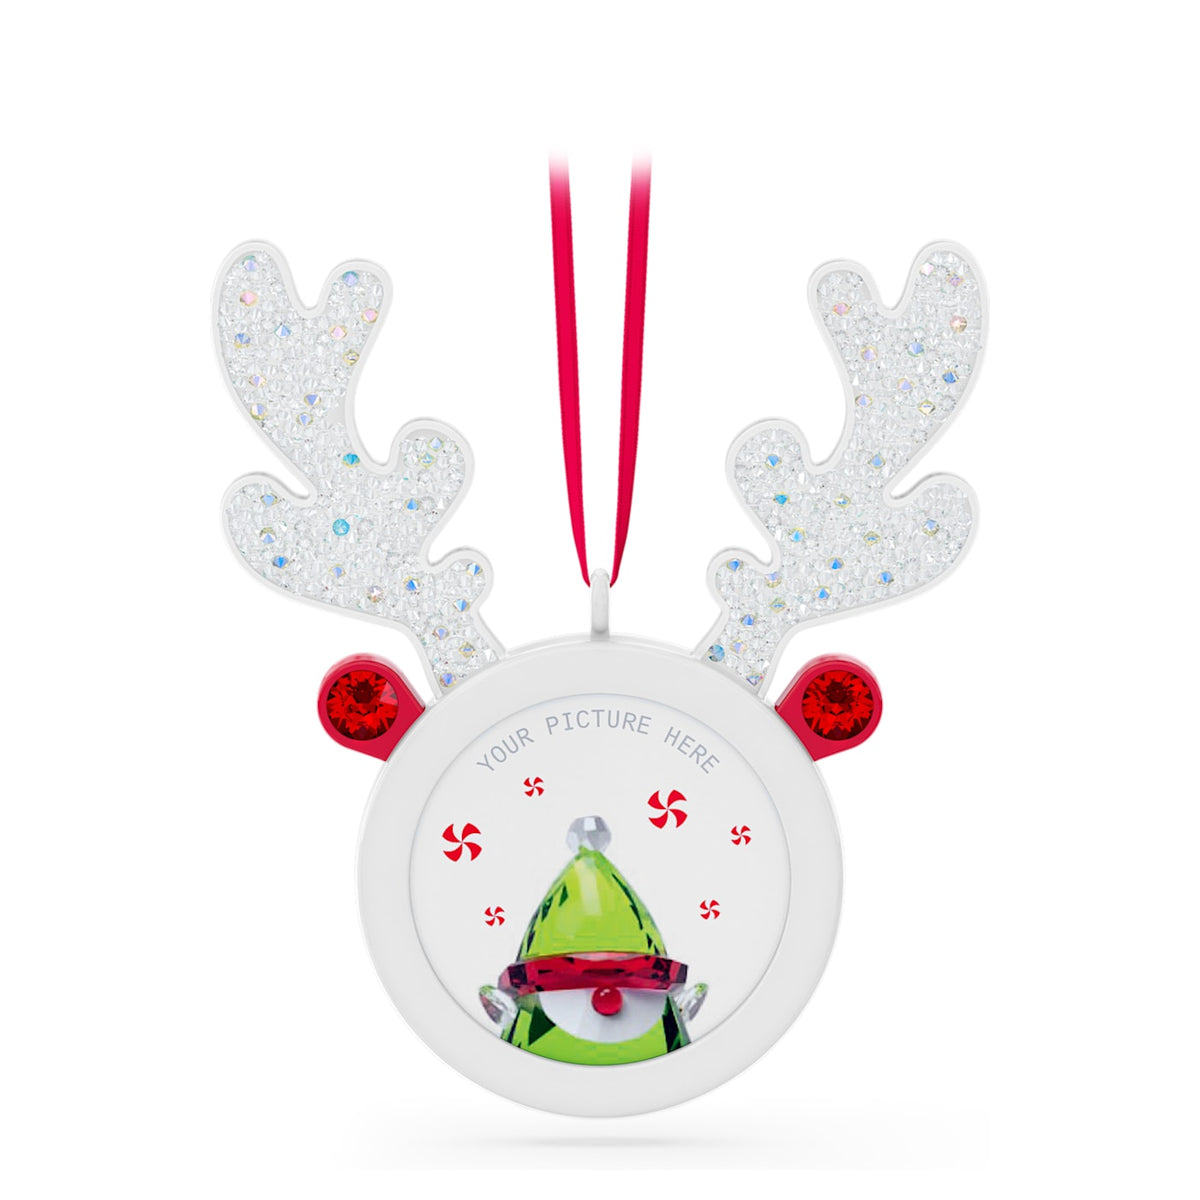 Swarovski Holiday Cheers: Picture Holder Reindeer - 5596391 Limited Edition- Discontinued